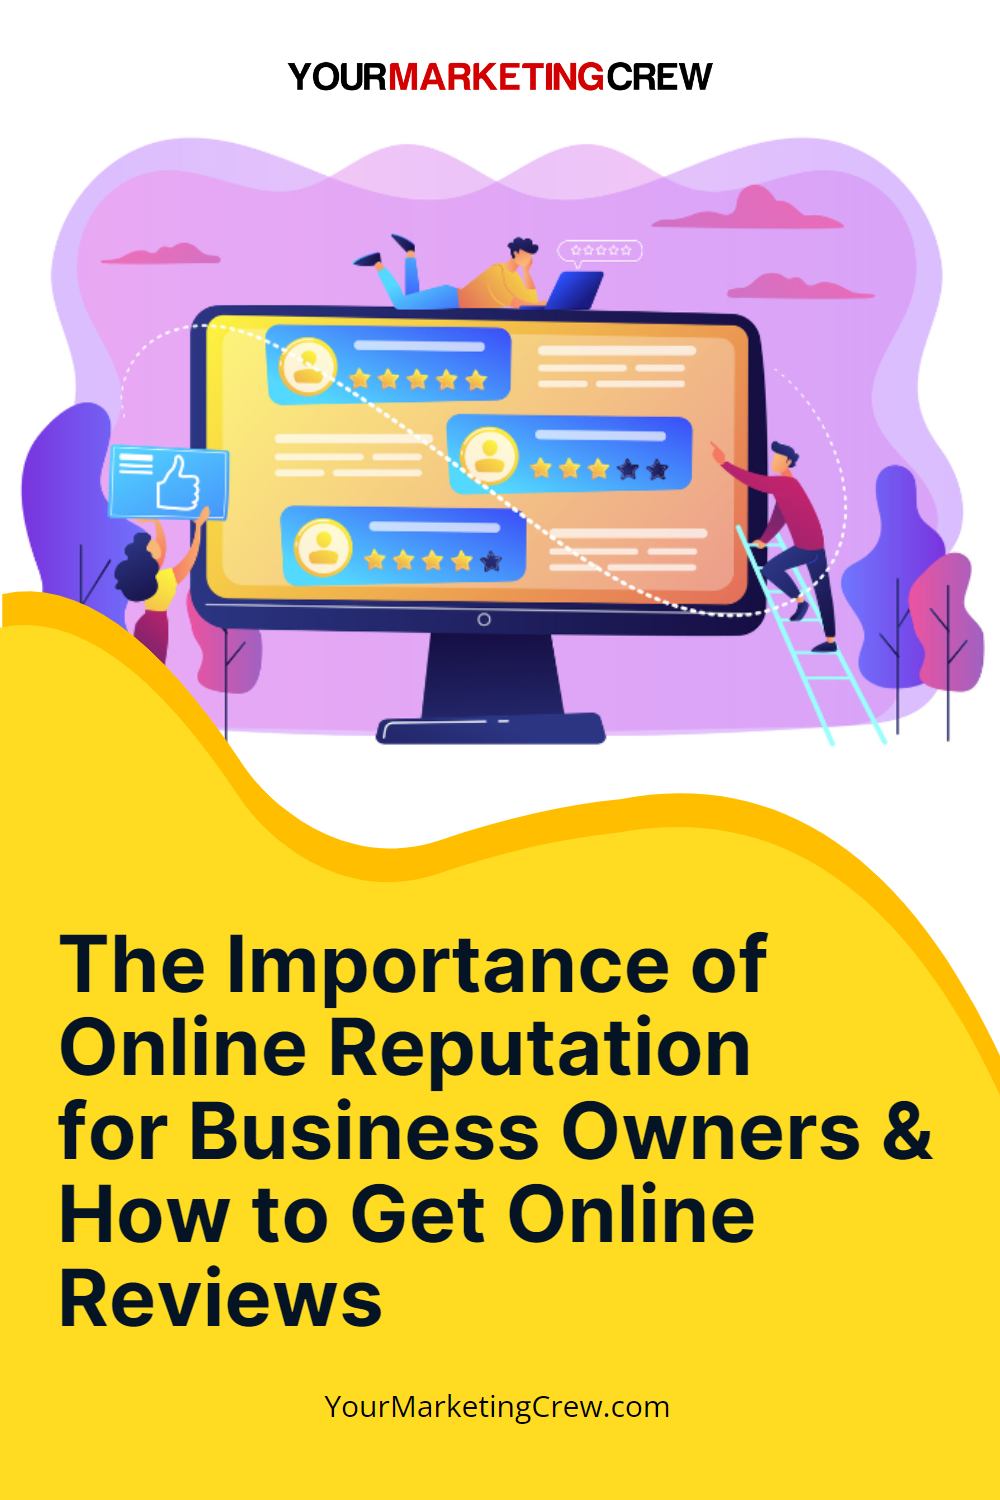 The Importance of Online Reputation & How to Get Reviews